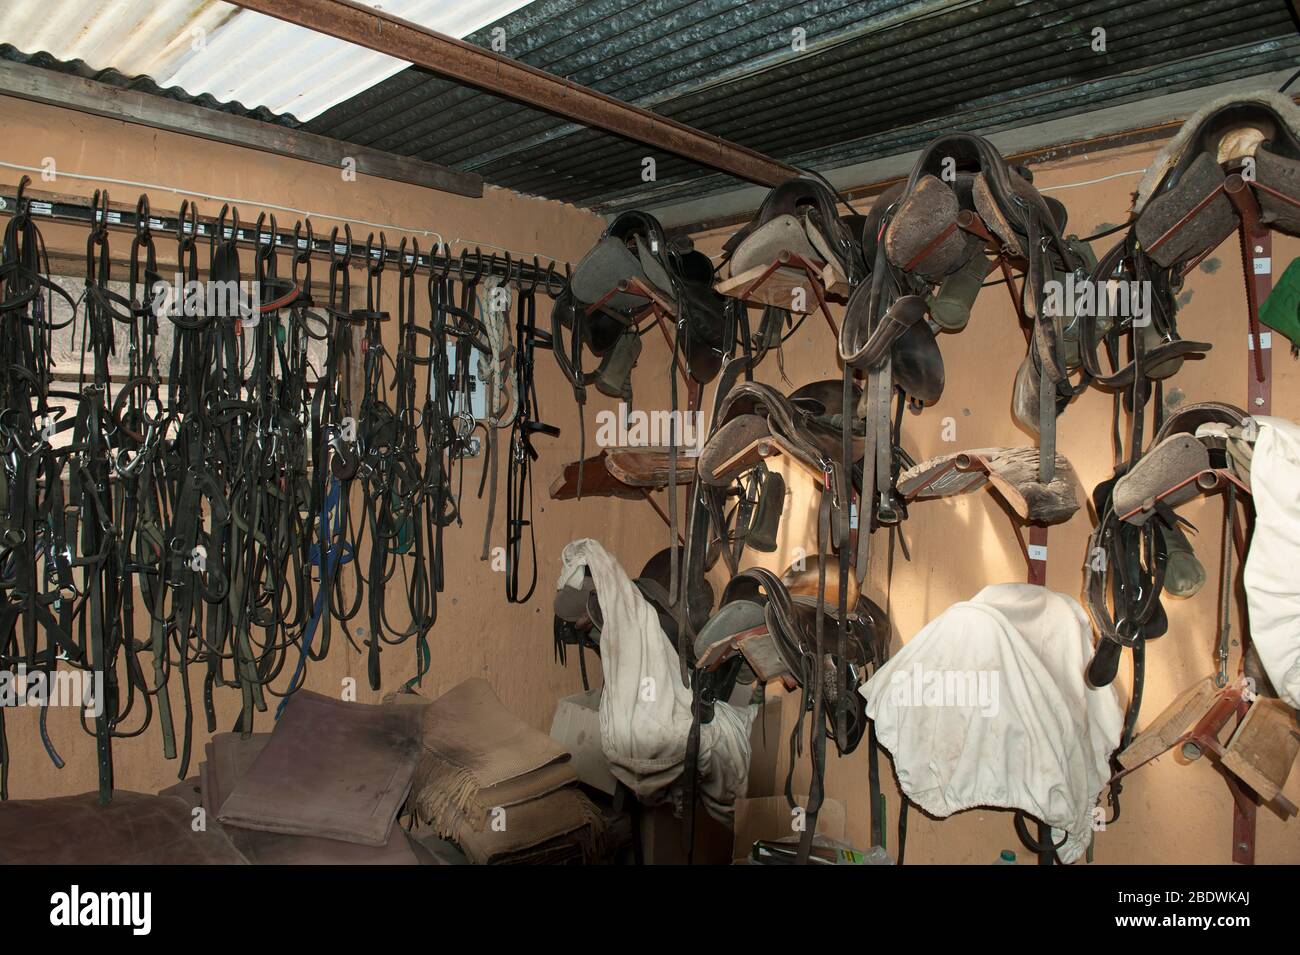 Stable and horseriding equipment, bridles, saddles and stirrups, in stables, Ant's Hill Reserve, near Vaalwater, Limpopo province, South Africa Stock Photo